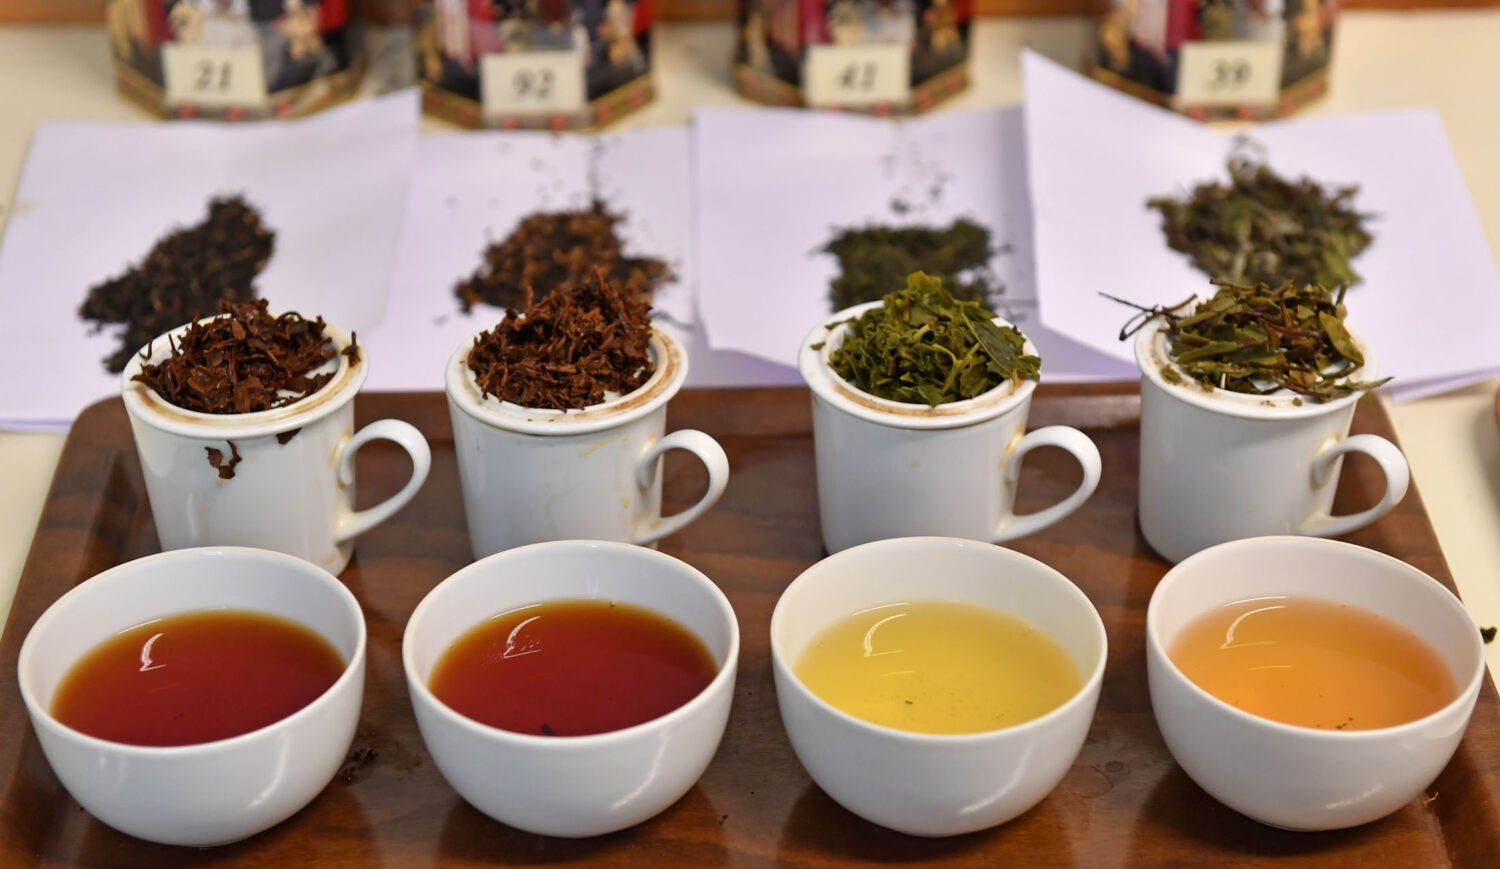 Since 1914 you can find fine delicacies from all over the world in Alfred Ewert's tea and spice store © Göttingen Tourismus und Marketing / Mischke